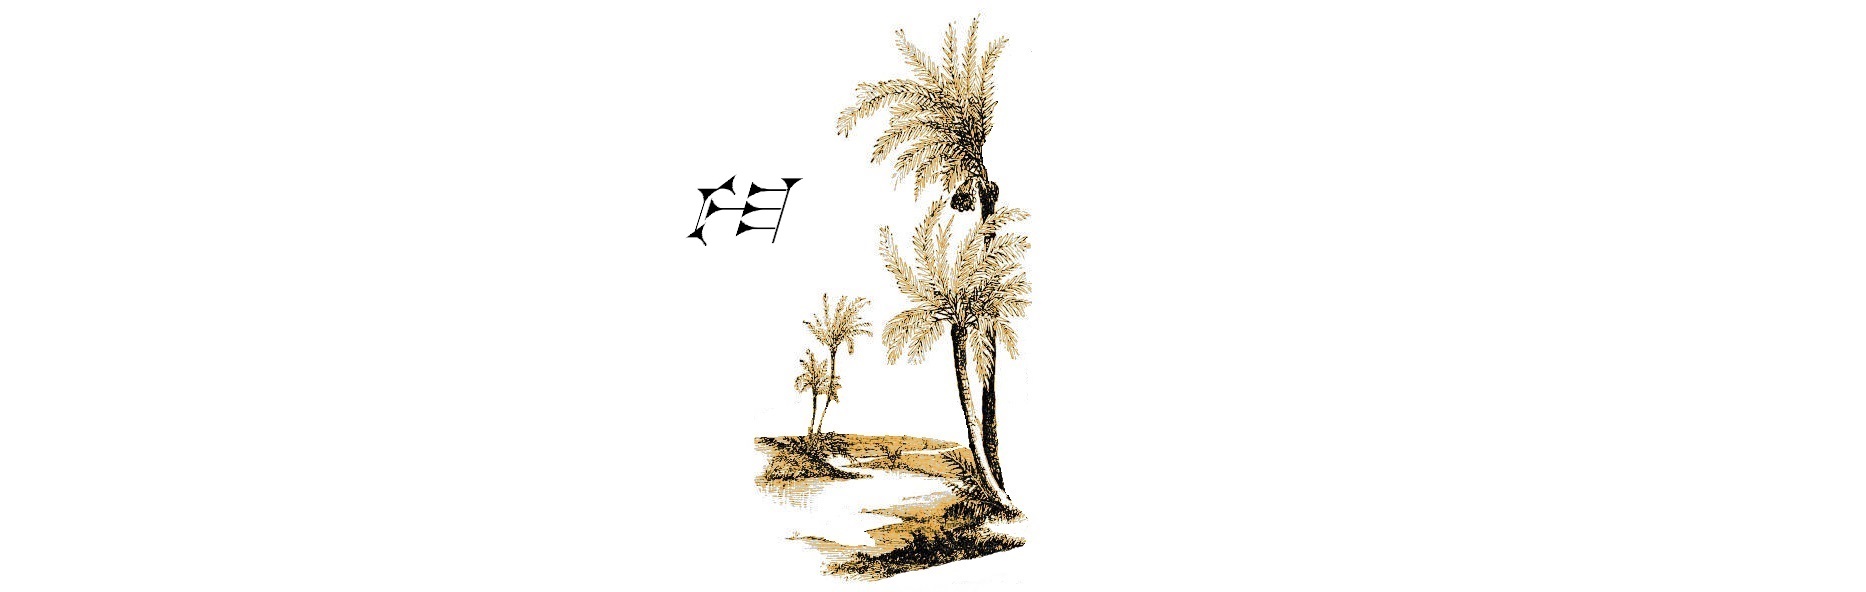 Date Palm trees (Phoenix Dactylifera) in rural Israel. Vintage etching circa mid 19th century.